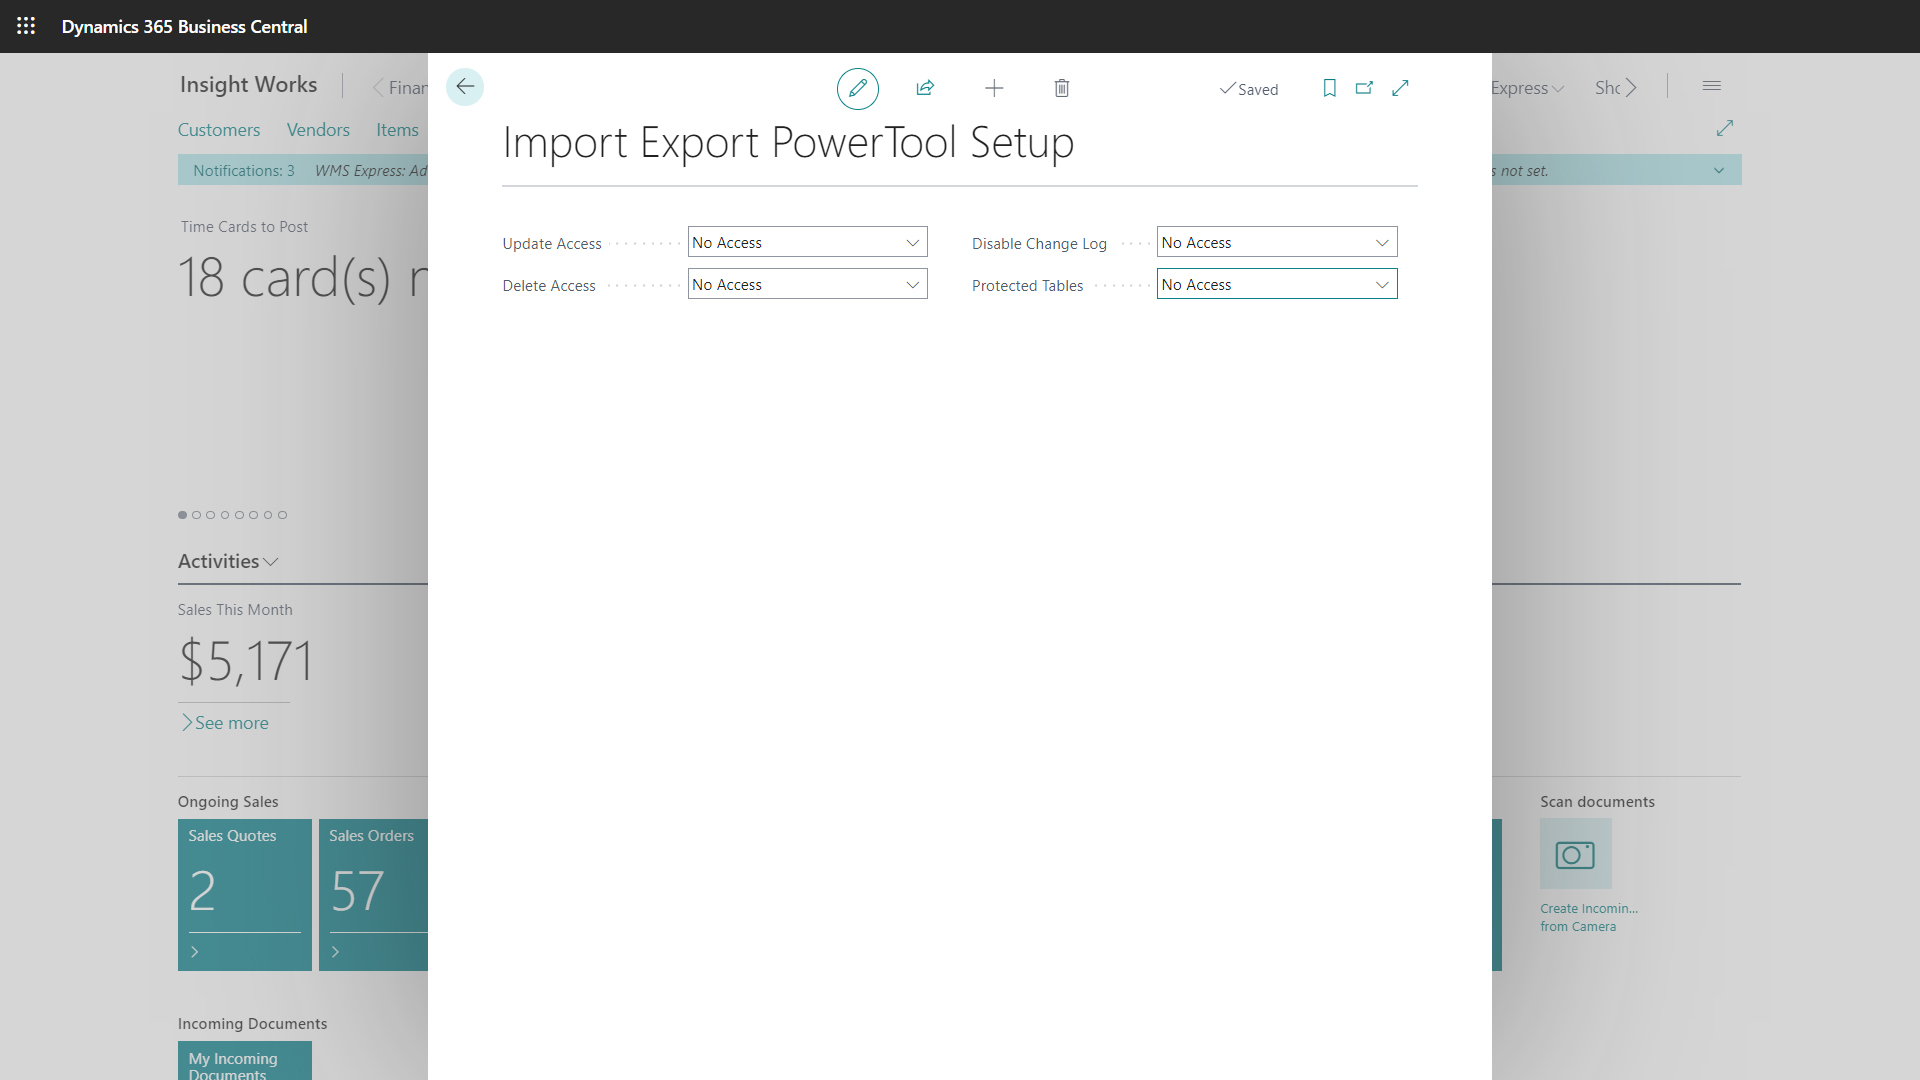 Configure Import Export PowerTool to perfection: fine-tune Update Access, Delete Access, Disable Change Log, and manage Protected Tables for a secure and customized data migration experience in Dynamics 365 Business Central.